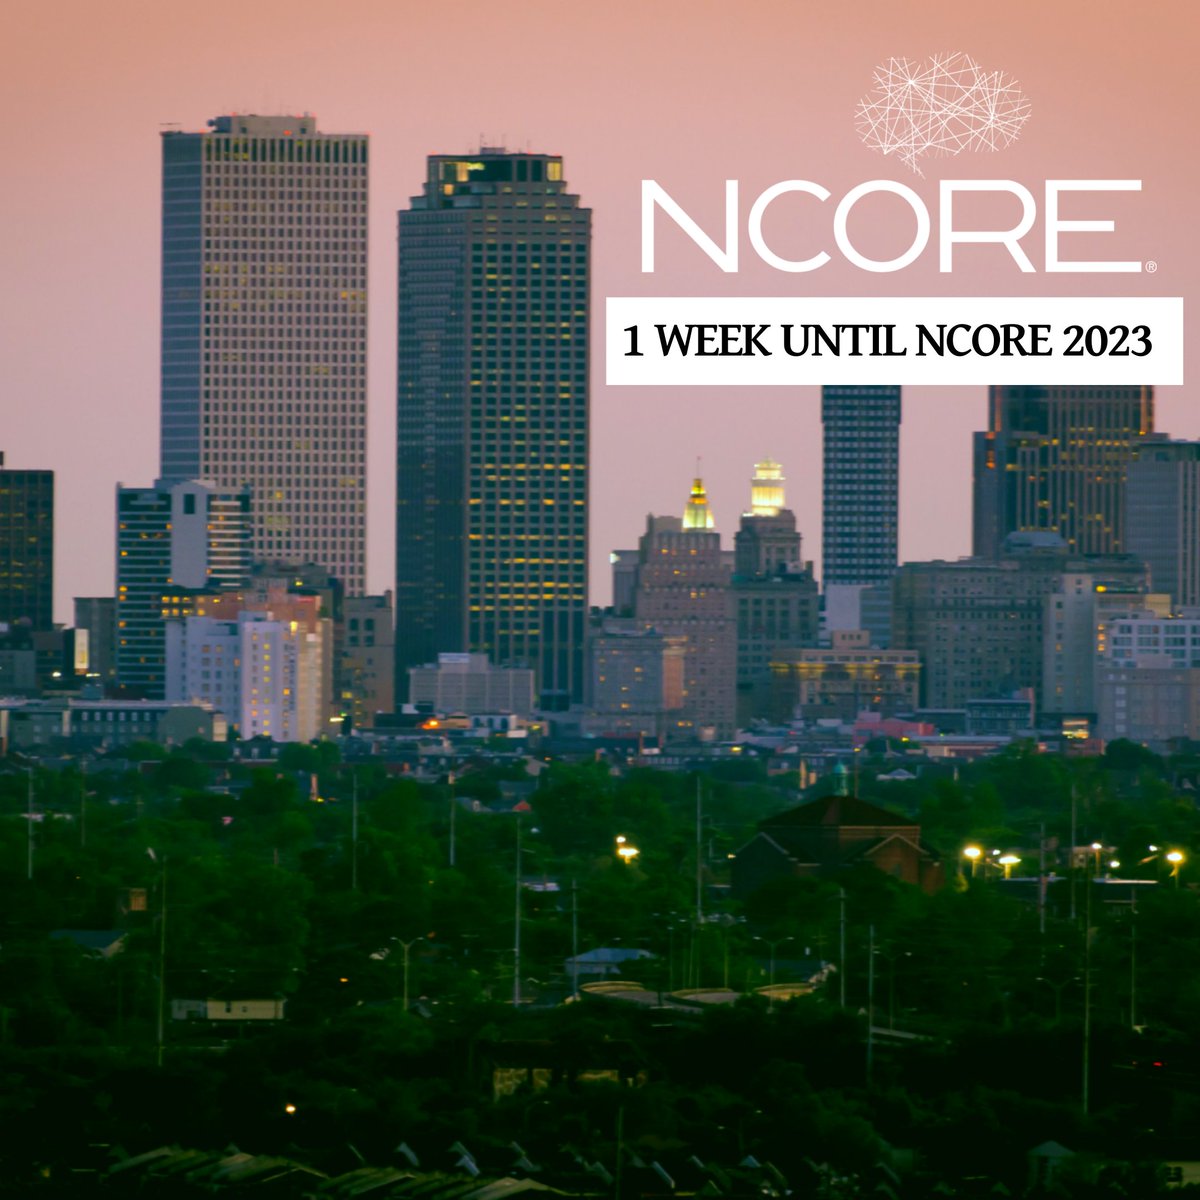 We're breaking records! With an incredible surge in registrations, we're on track to host the highest attended NCORE in 35 years! 🎉 Get ready for an unforgettable event in New Orleans. We can't wait to see all of you there! 🌟 #NCORE2023 #NewOrleansBound